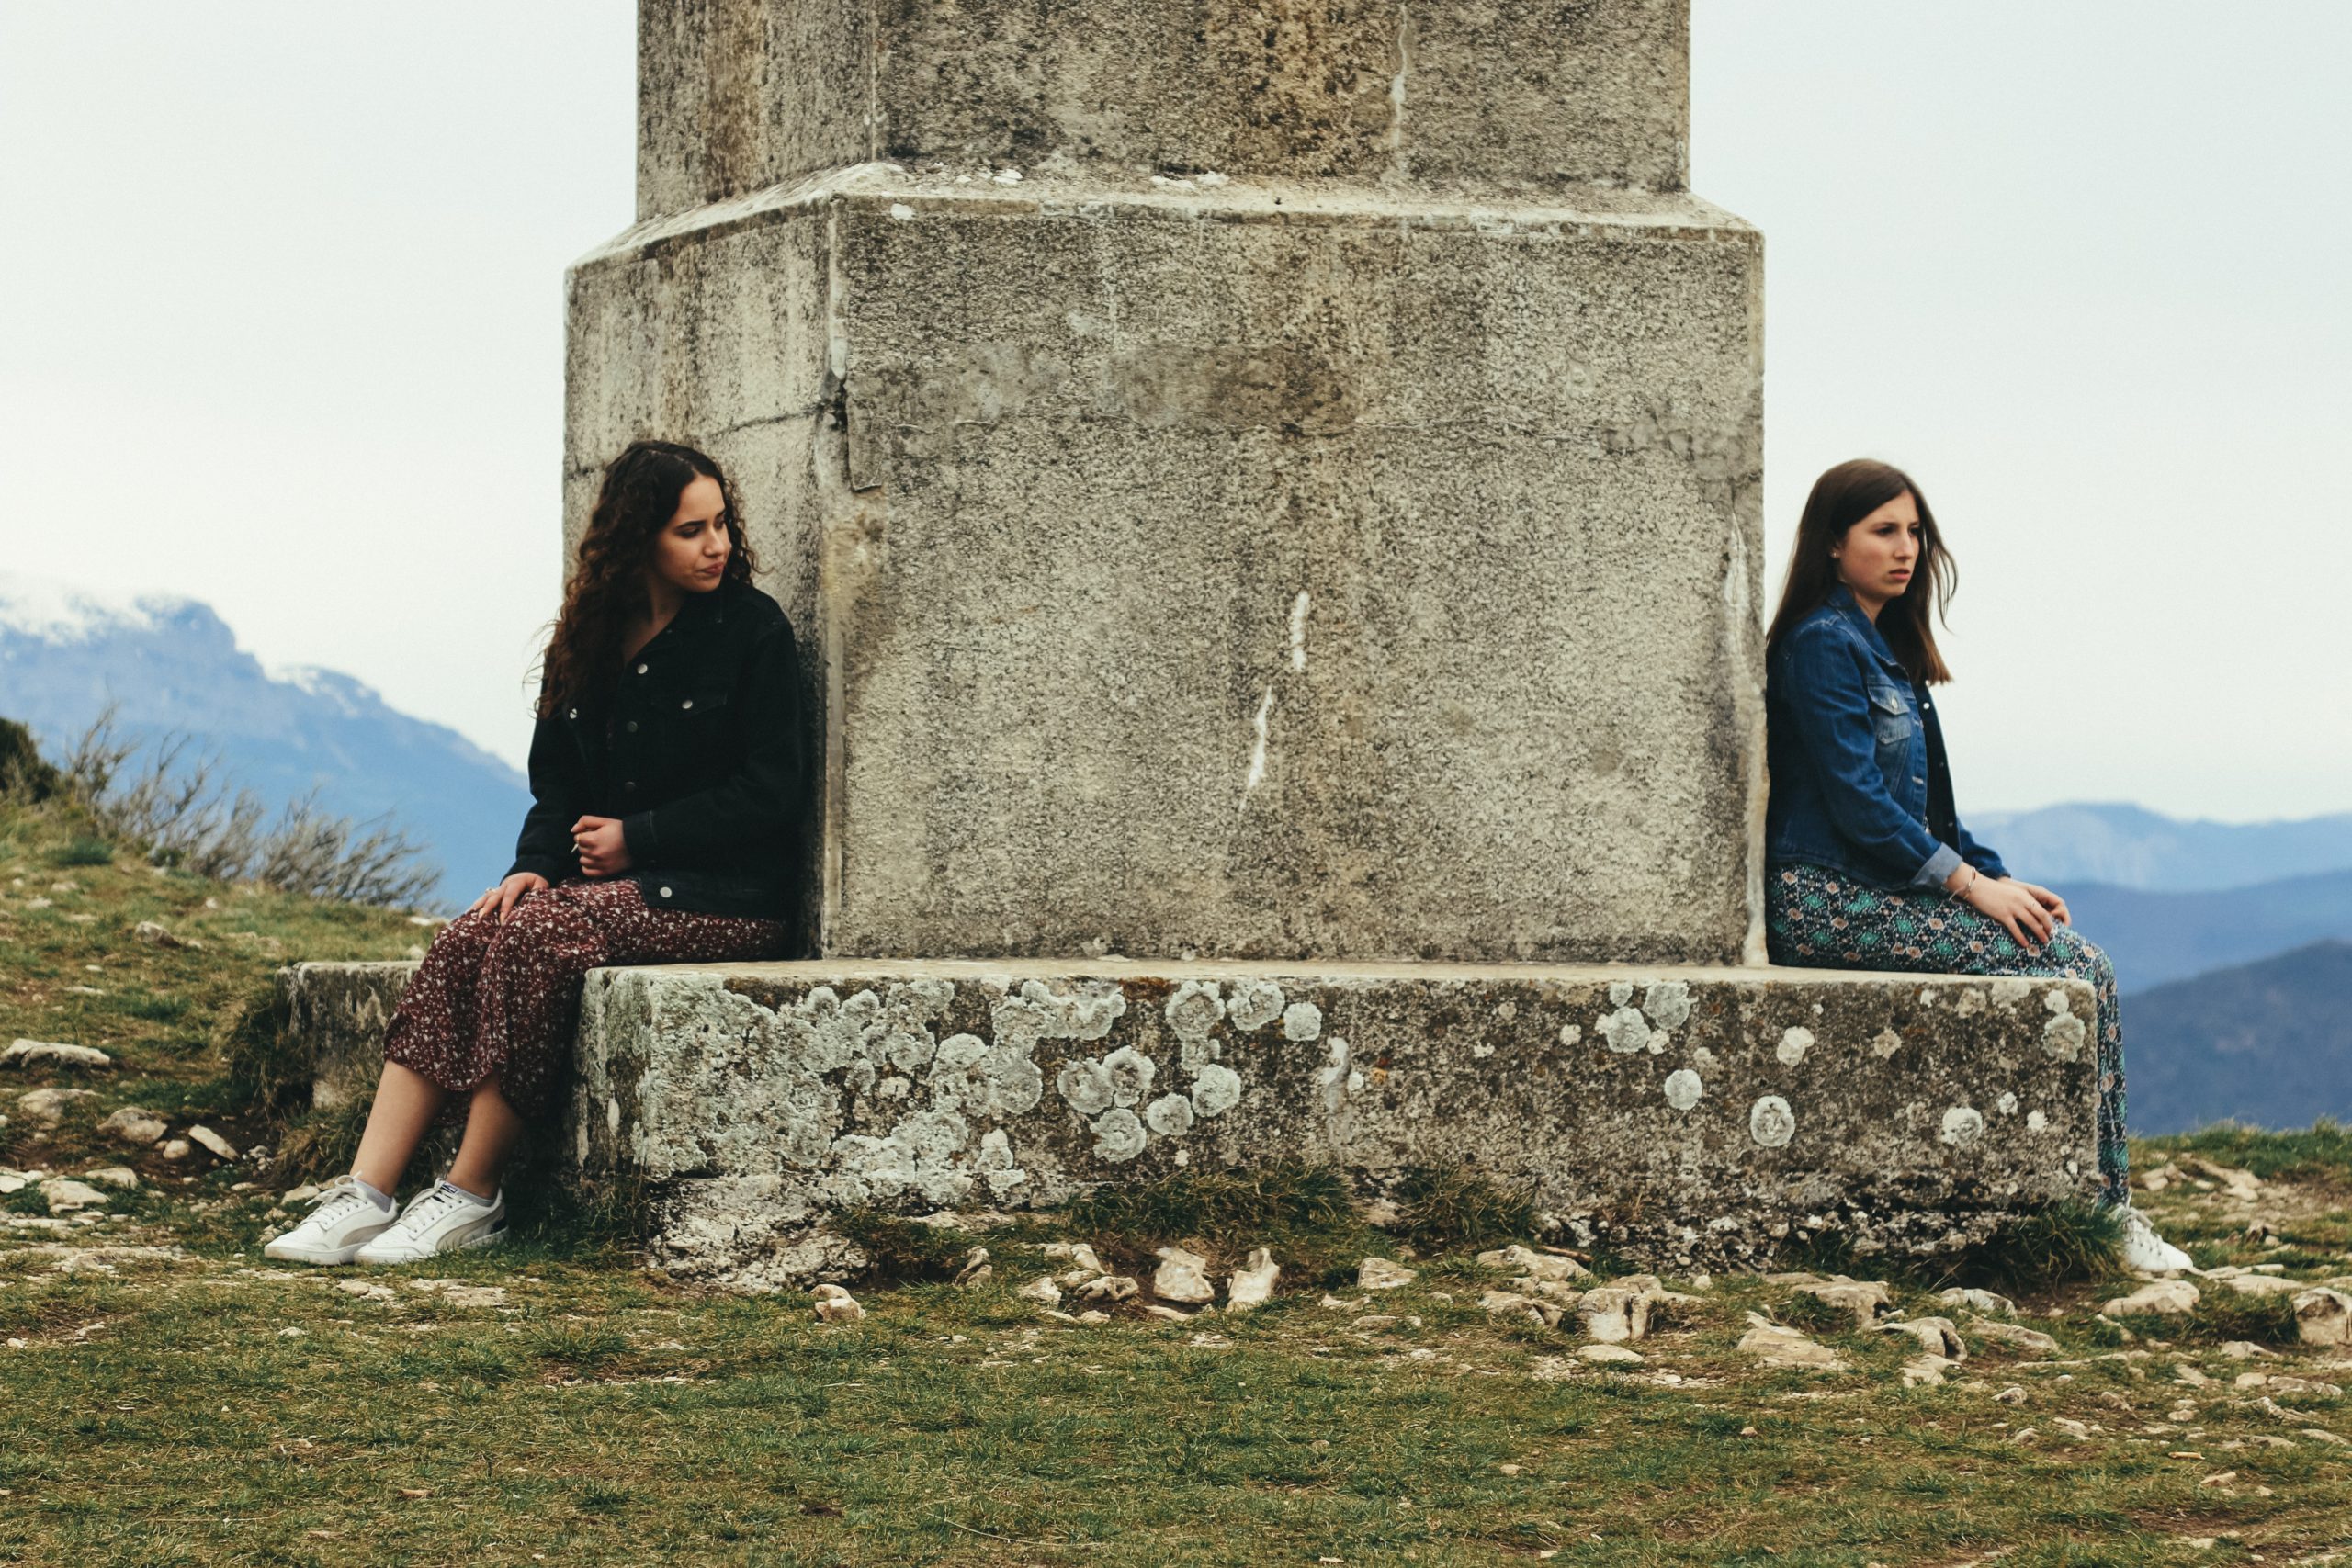 Two women sitting on opposite sides of a stone monument.